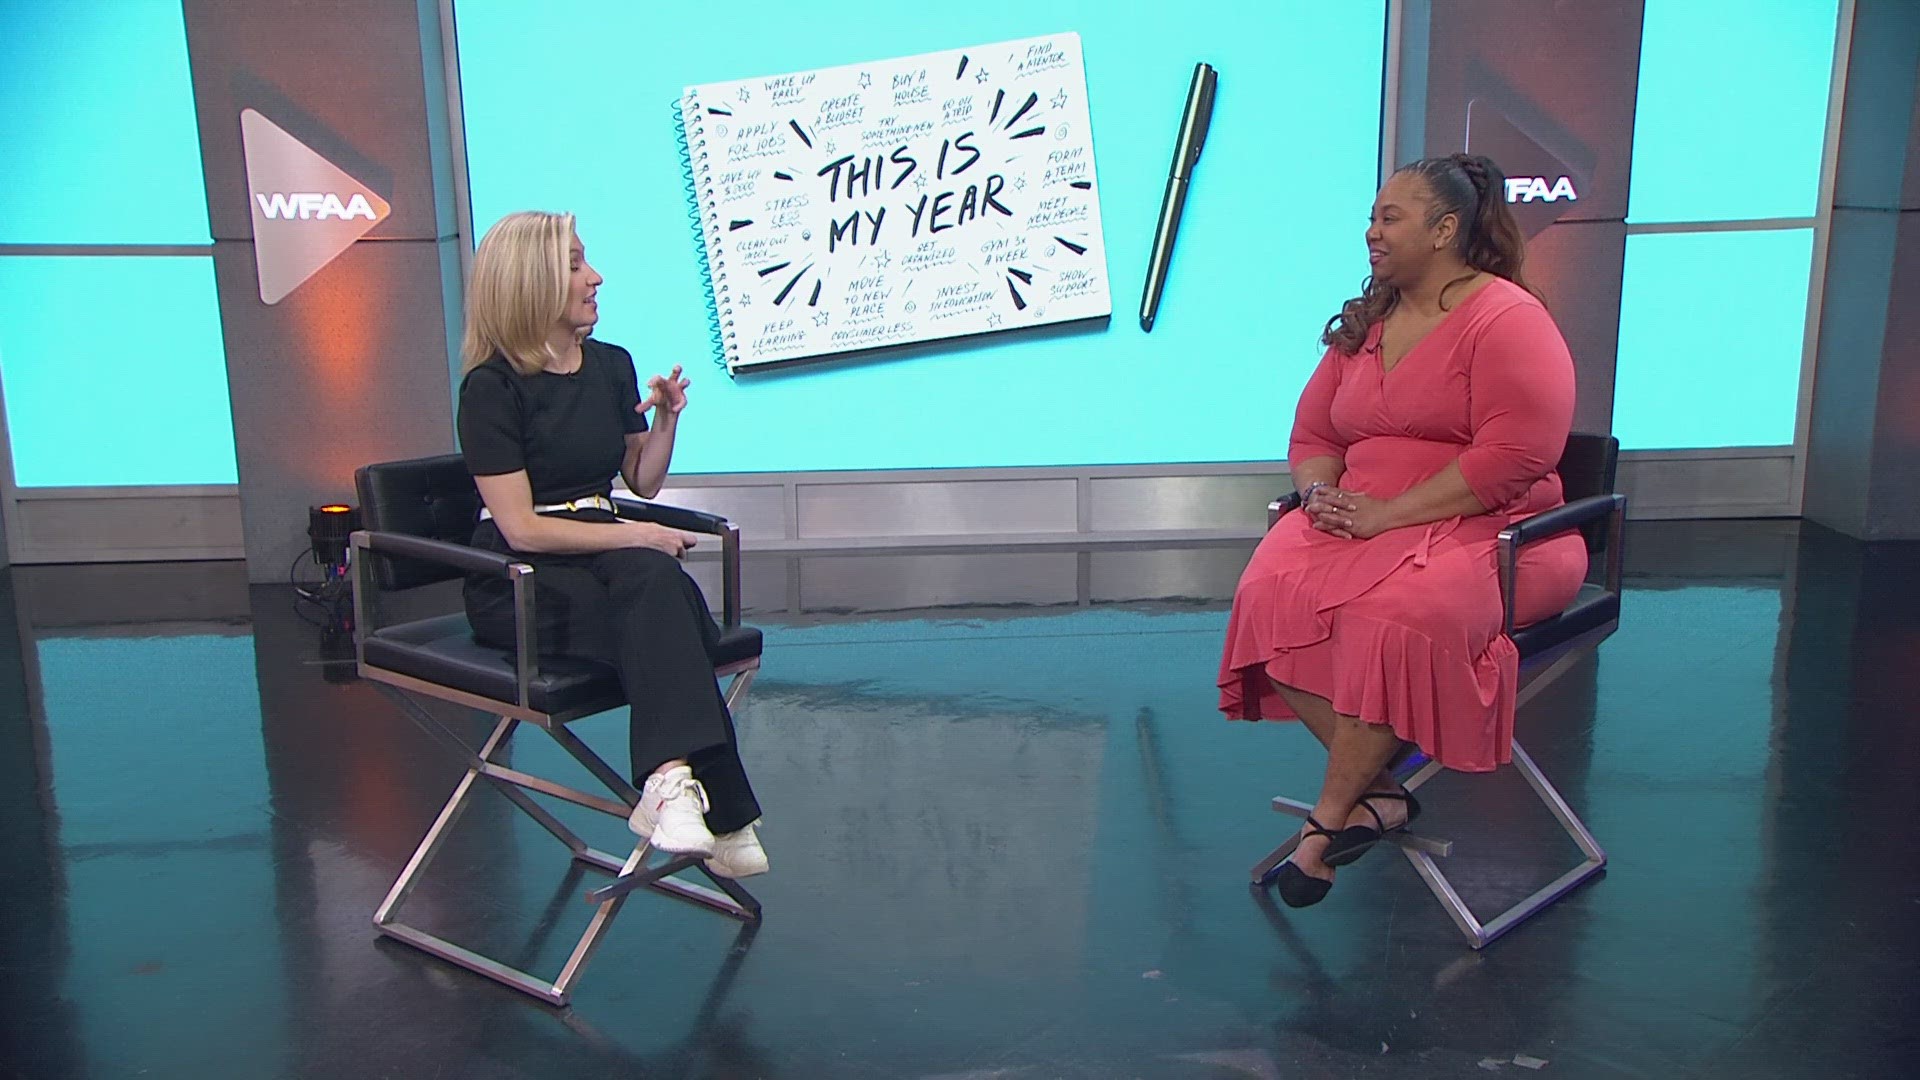 Christina Roy from Thriveworks Counseling suggests setting goals, intentions, and habits to pick up in the new year.